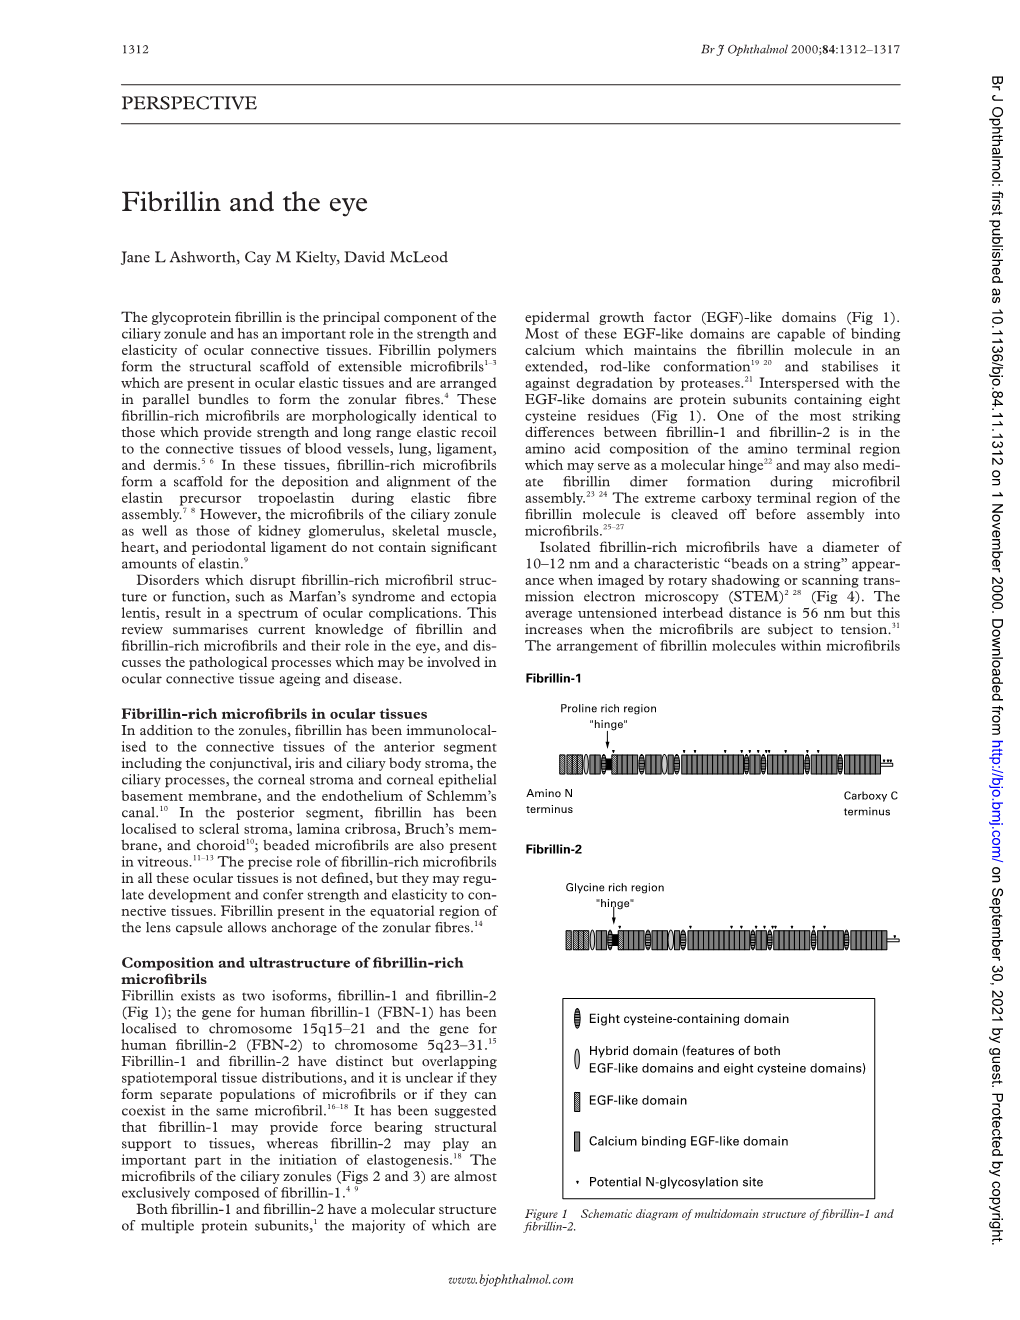 Fibrillin and the Eye